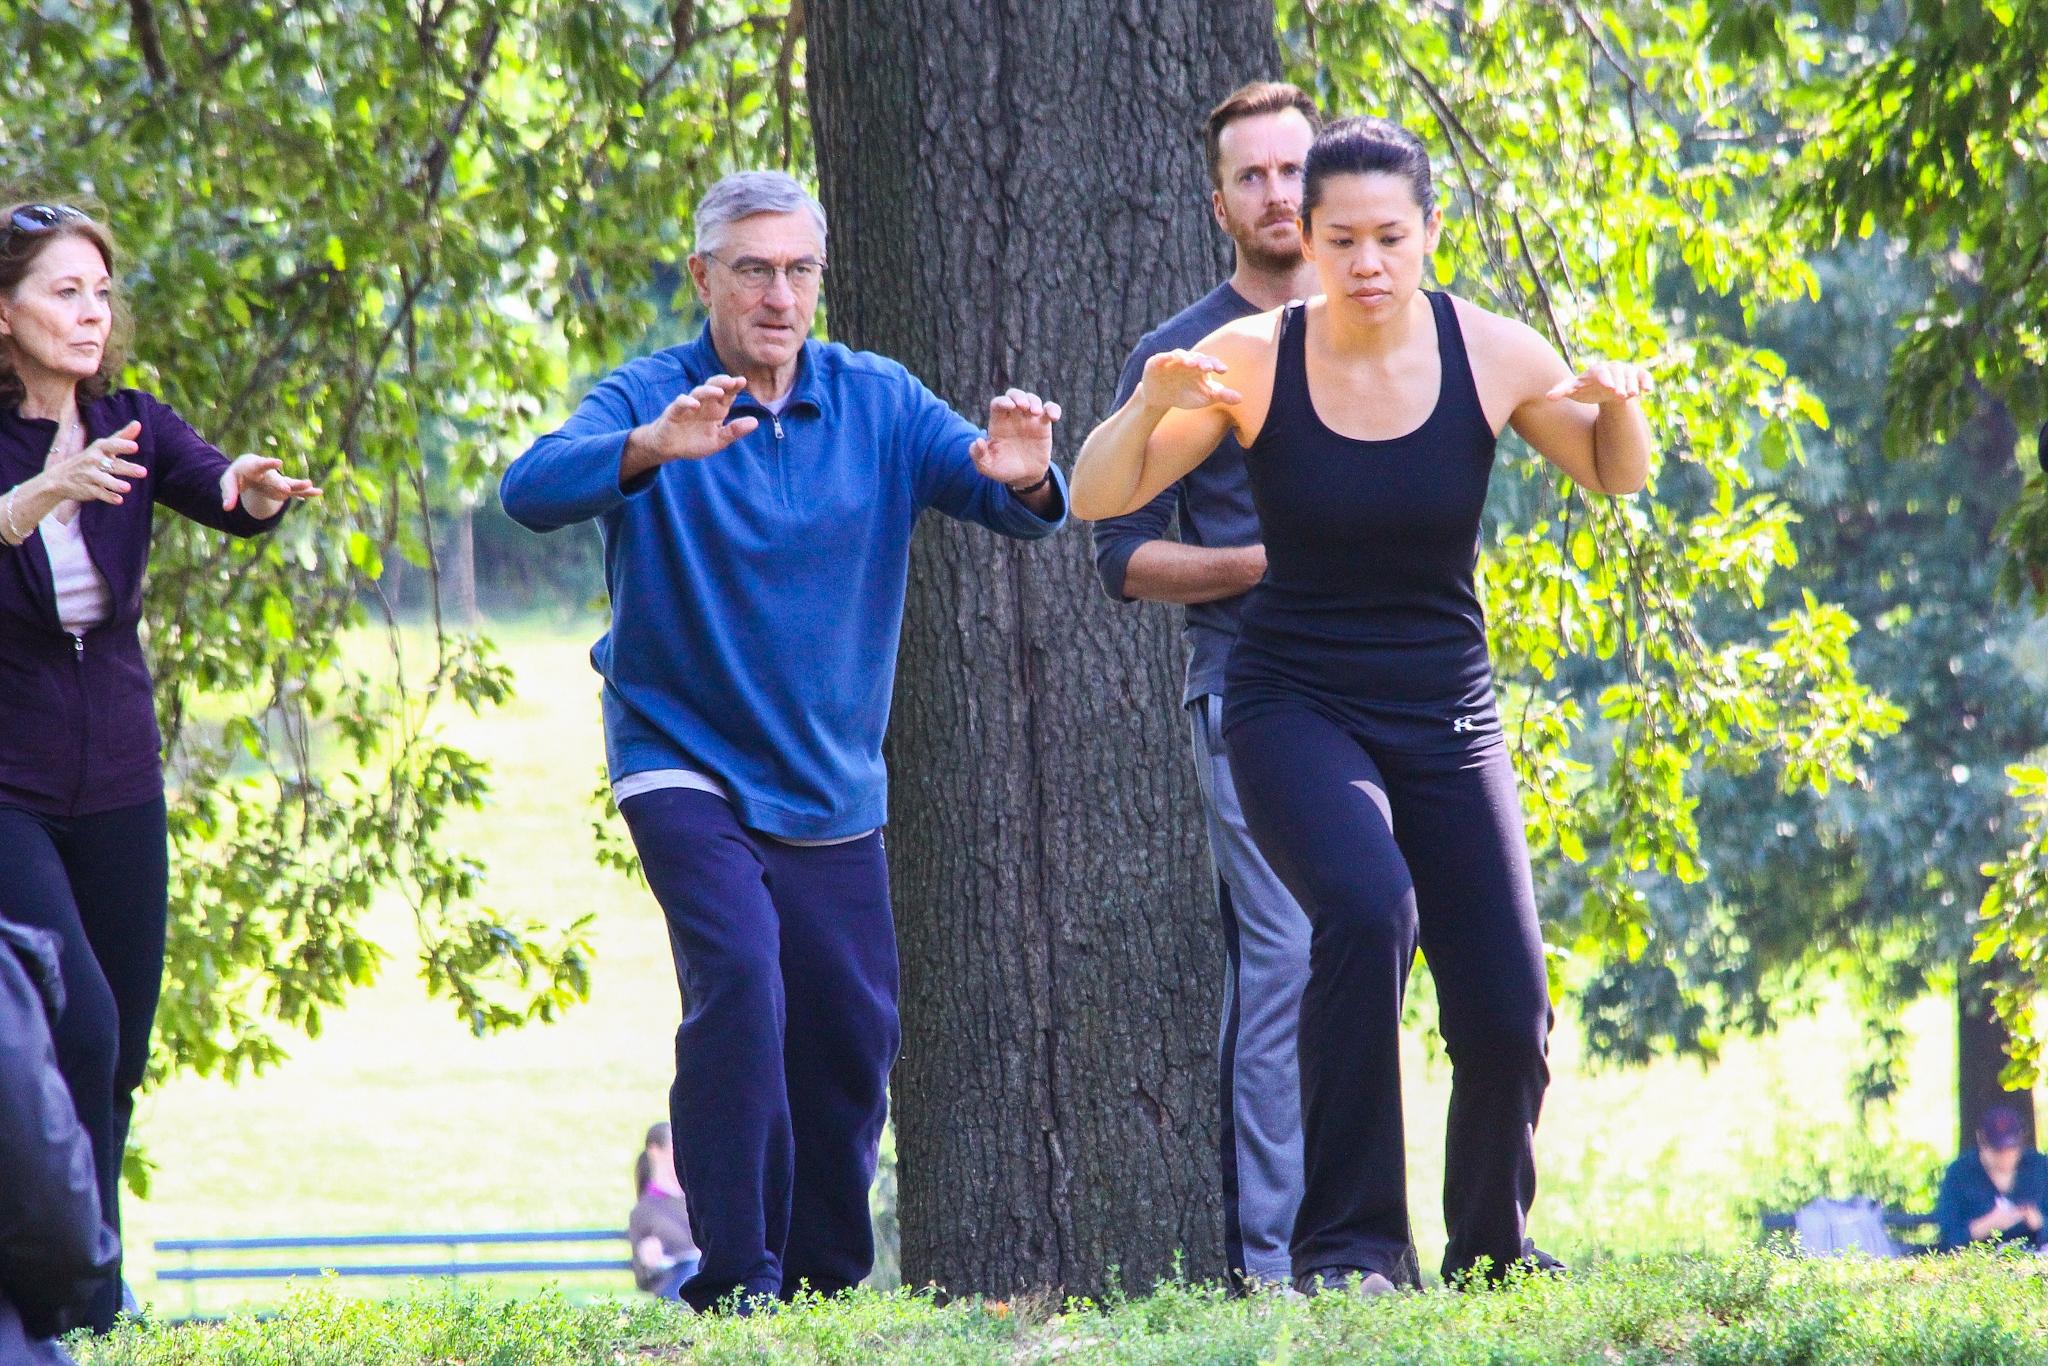 Robert DeNiro amp Tiffany Chen along with Anne Hathaway are seen on the set of the movie The Intern in Prospect Park back in 2014